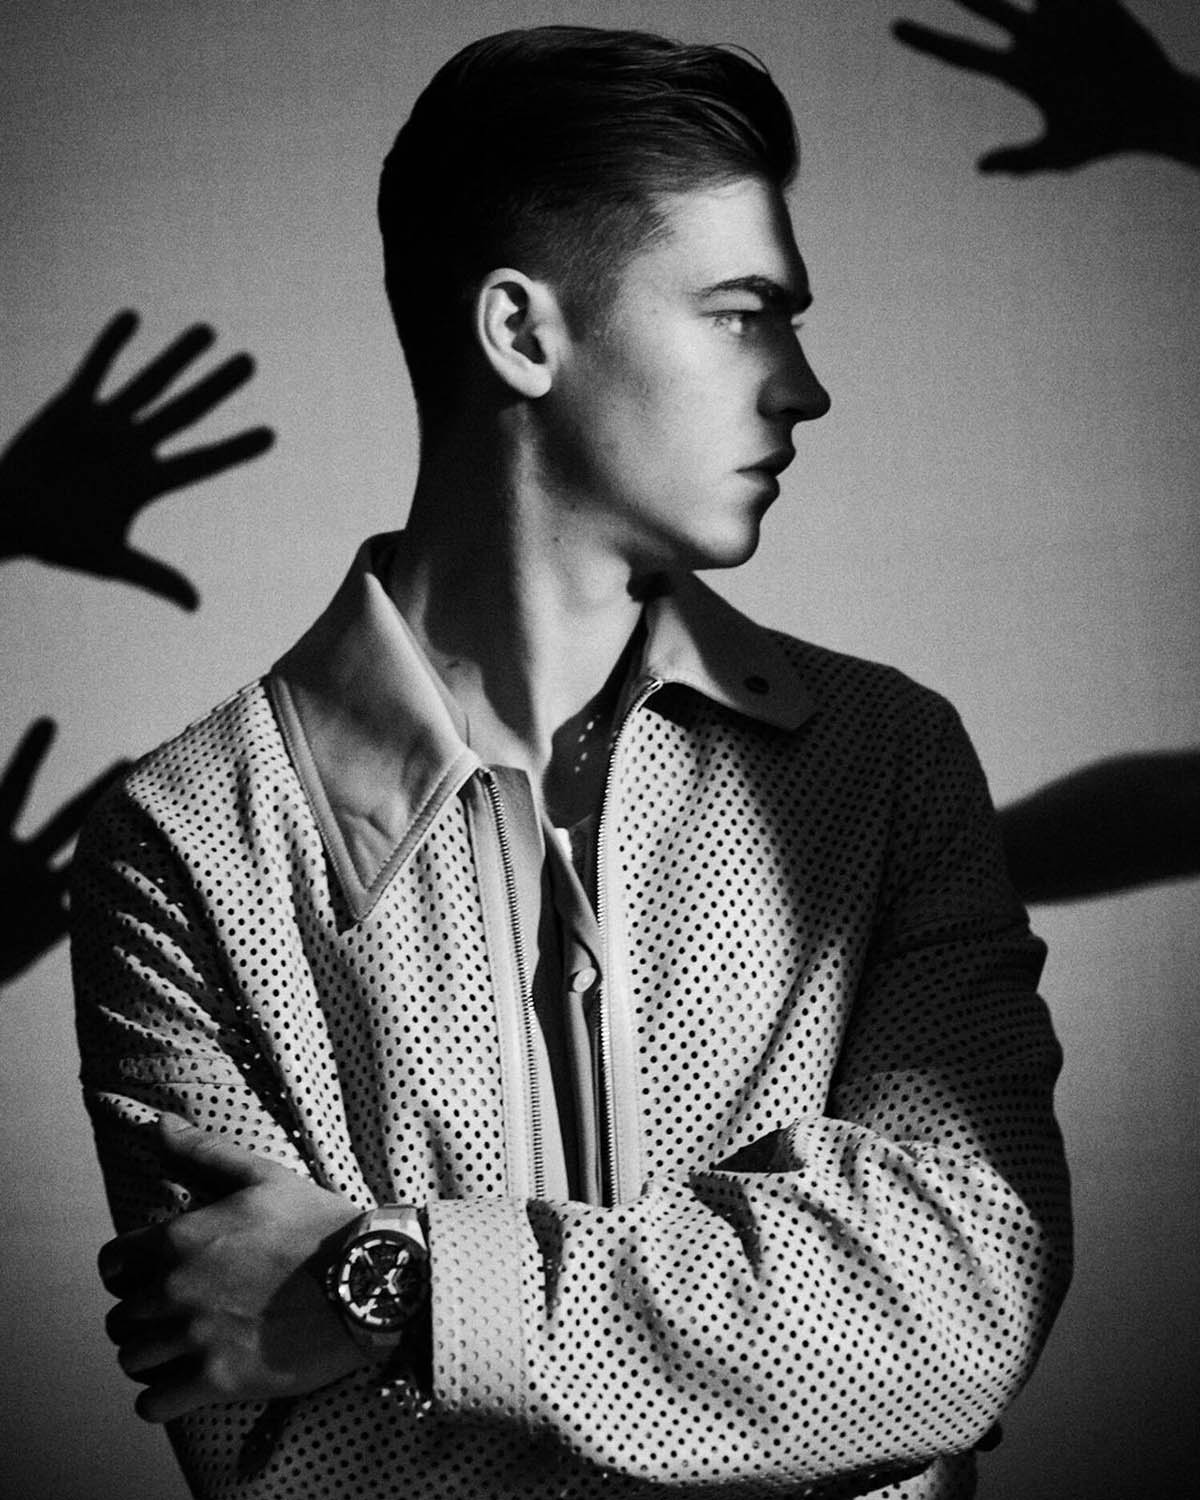 Hero Fiennes-Tiffin covers Flaunt Magazine Issue 173 by Jason Hetherington